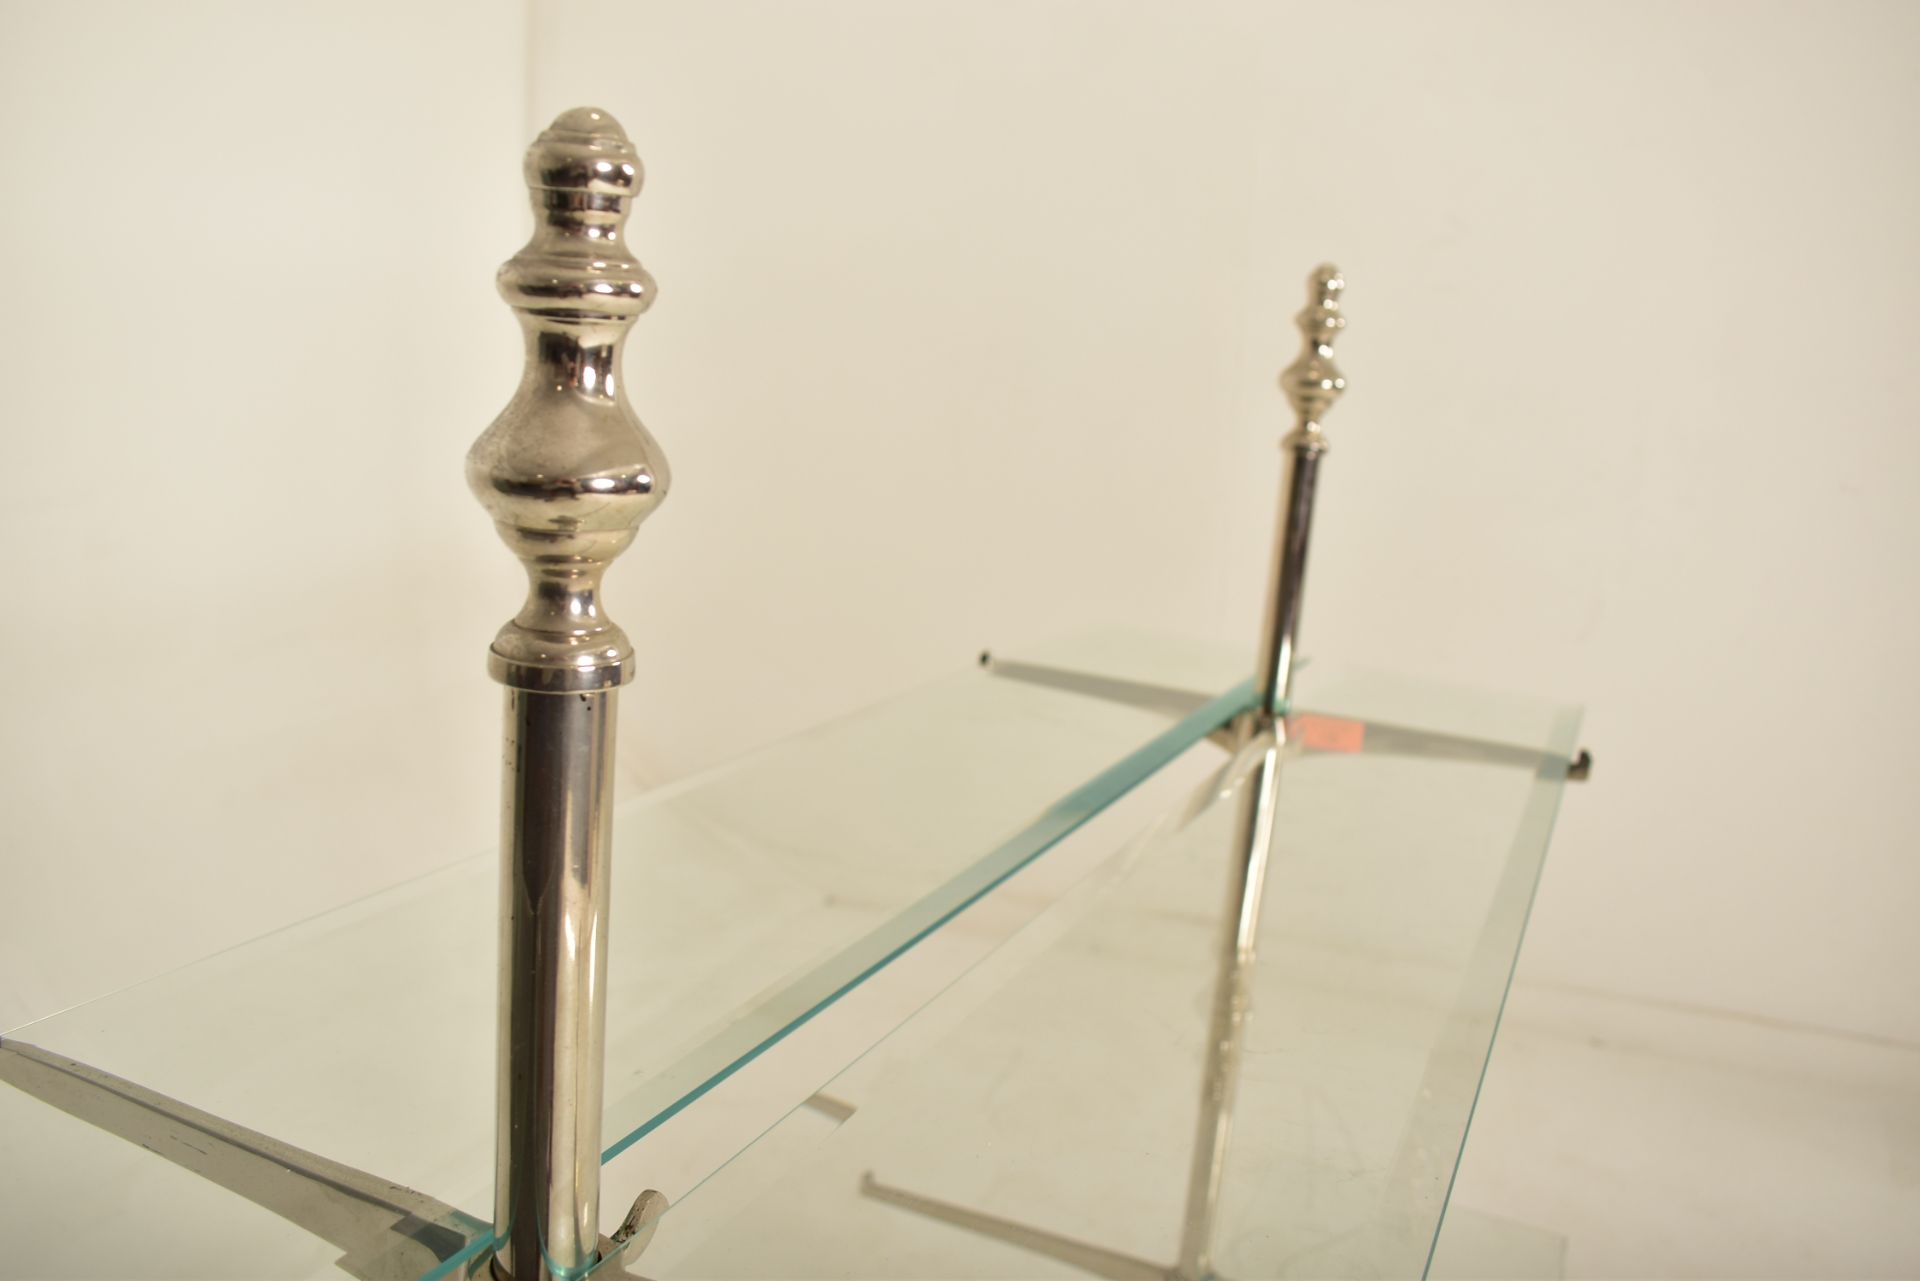 ART DECO CHROME AND GLASS SHOP DISPLAY STAND - Image 4 of 7